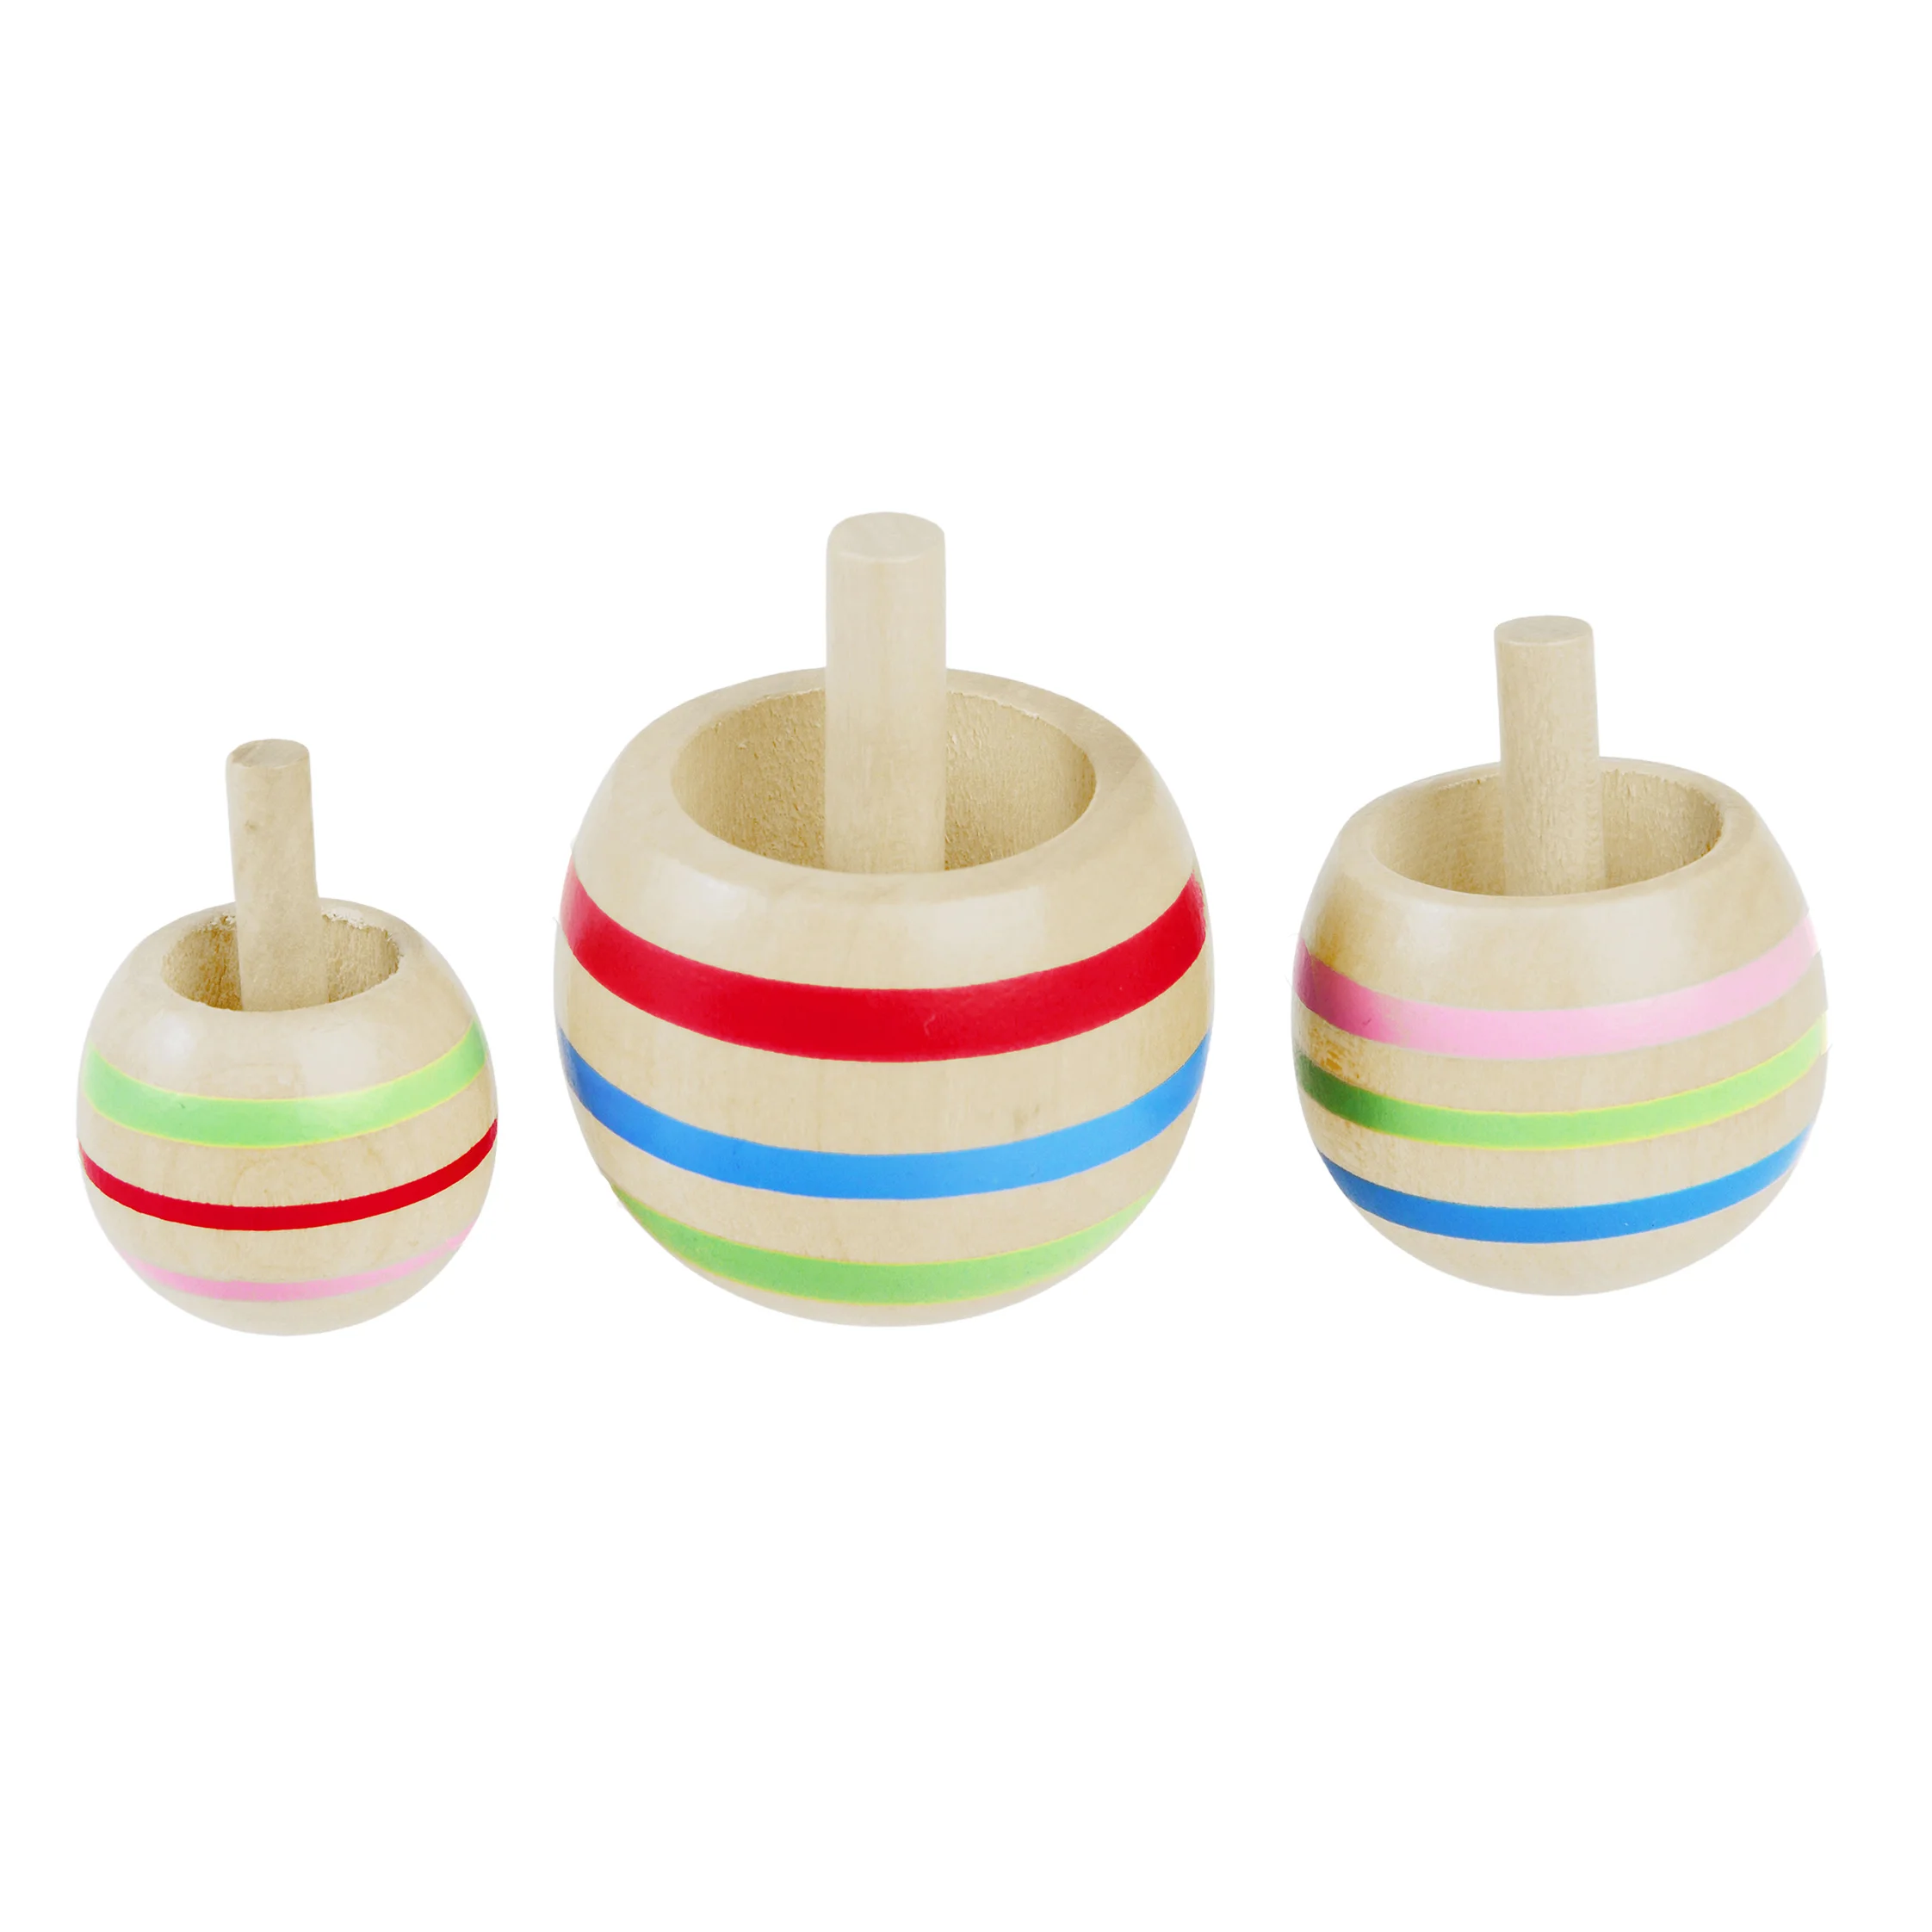 wooden spinning tops (set of 3)